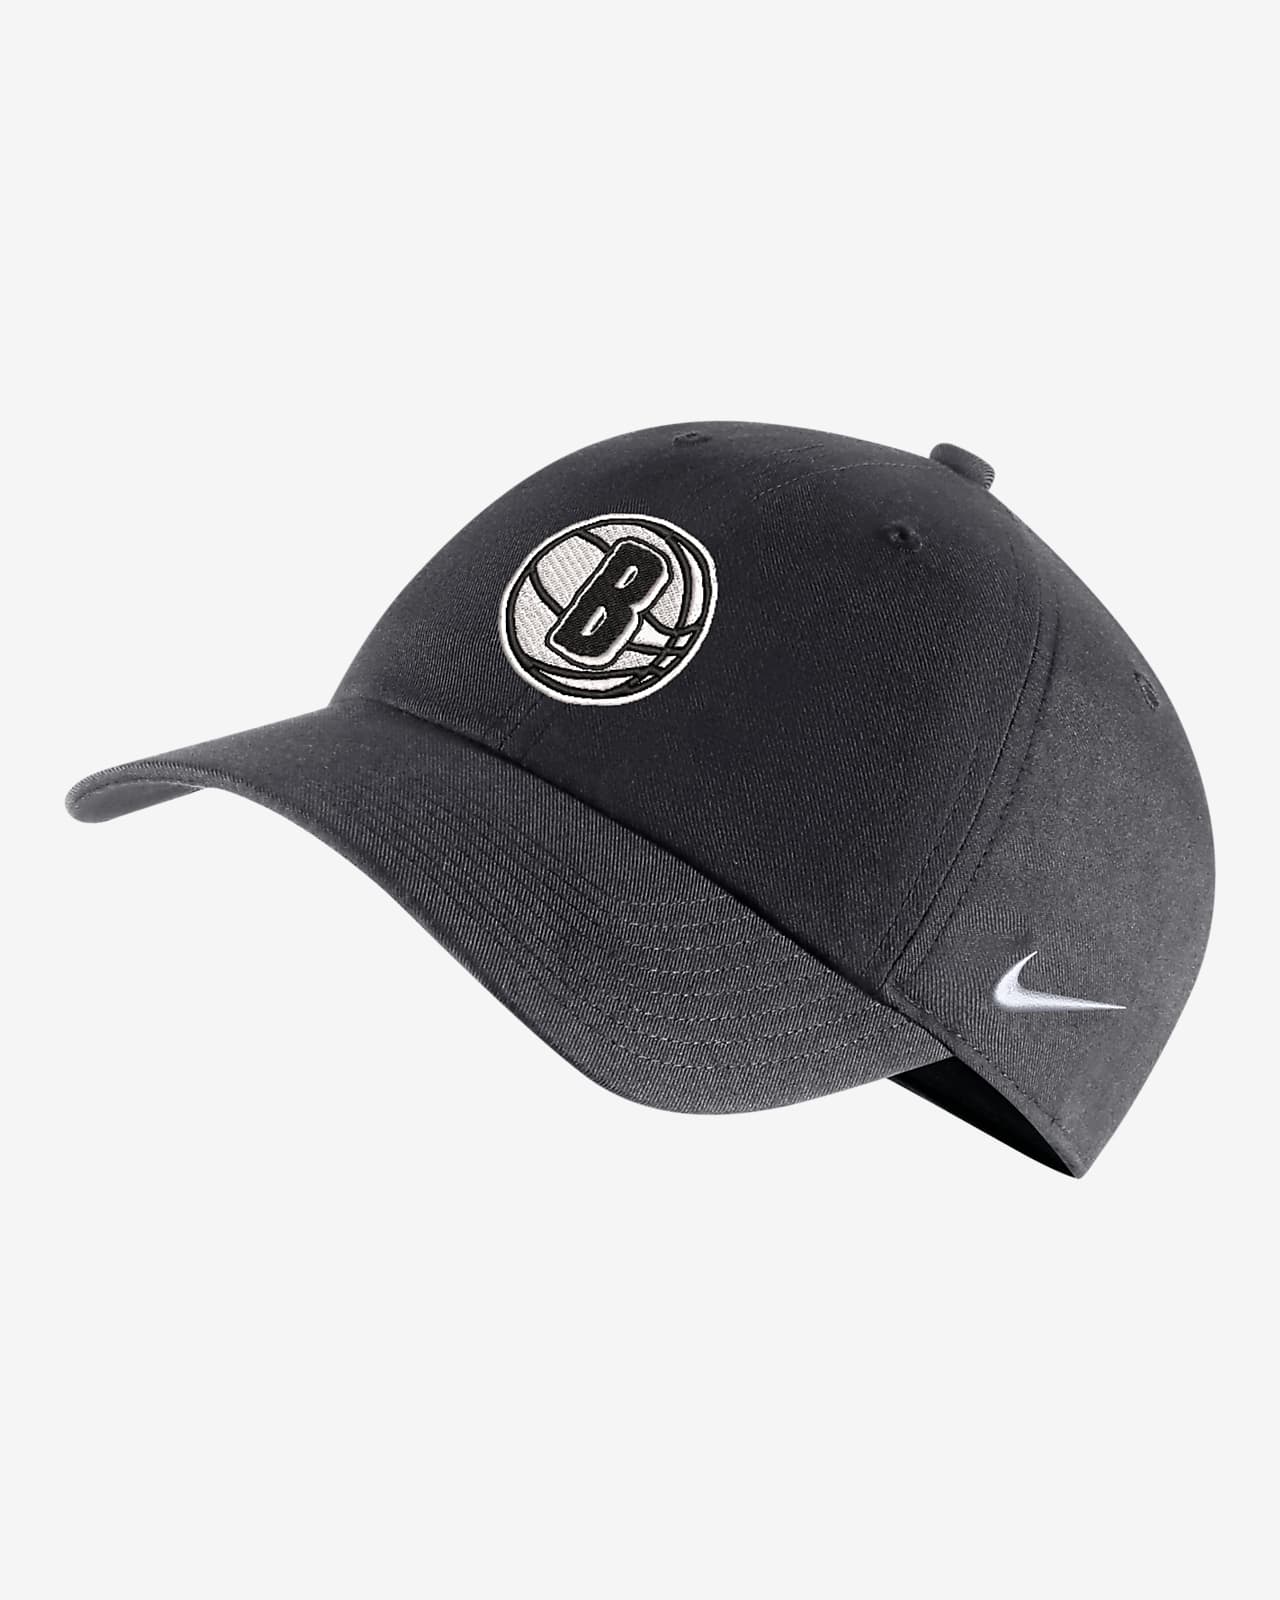 Nike Hats for sale in Memphis, Tennessee